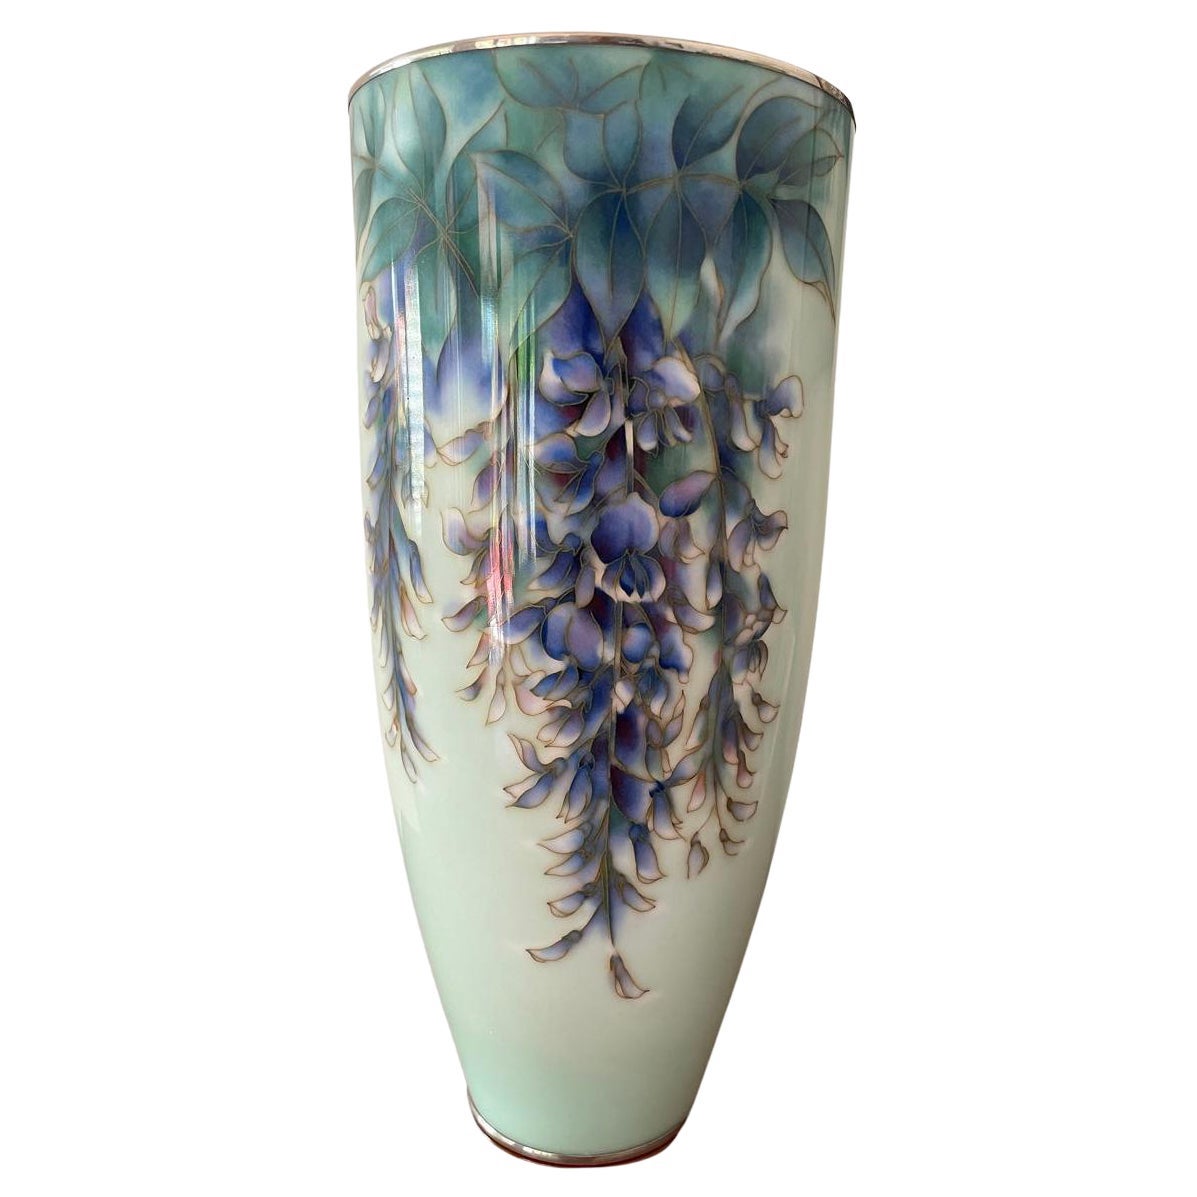 Japanese Cloisonne Vase Decorated with Flowering Wisteria, Ando Studio